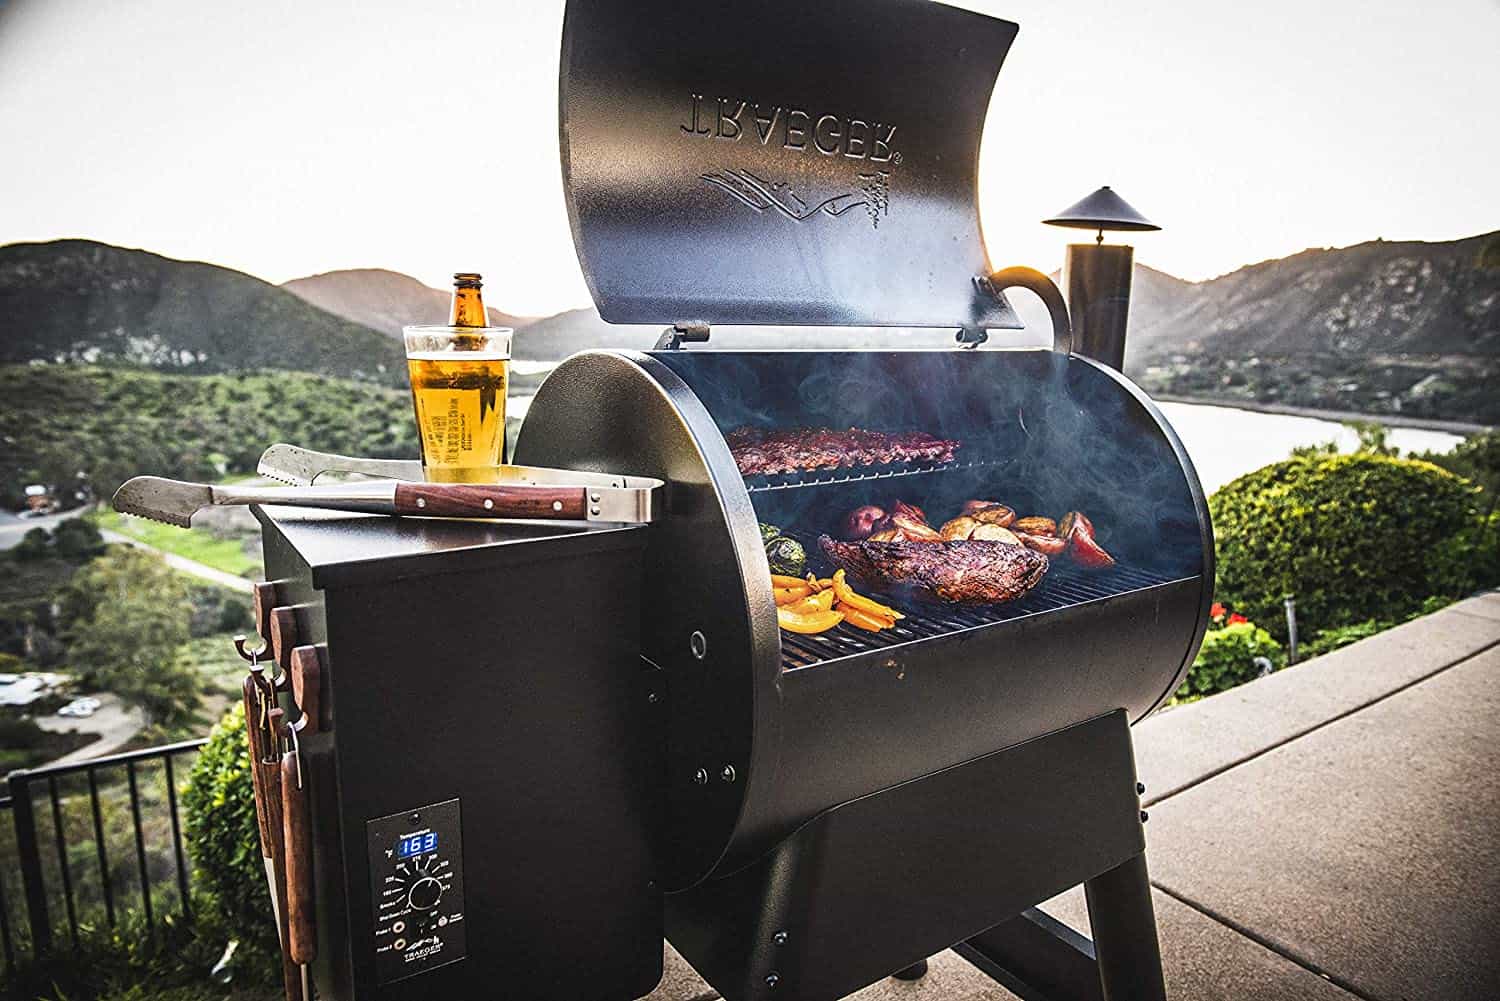 Best digital temperature control: Traeger Pro series 22 Grill and Smoker